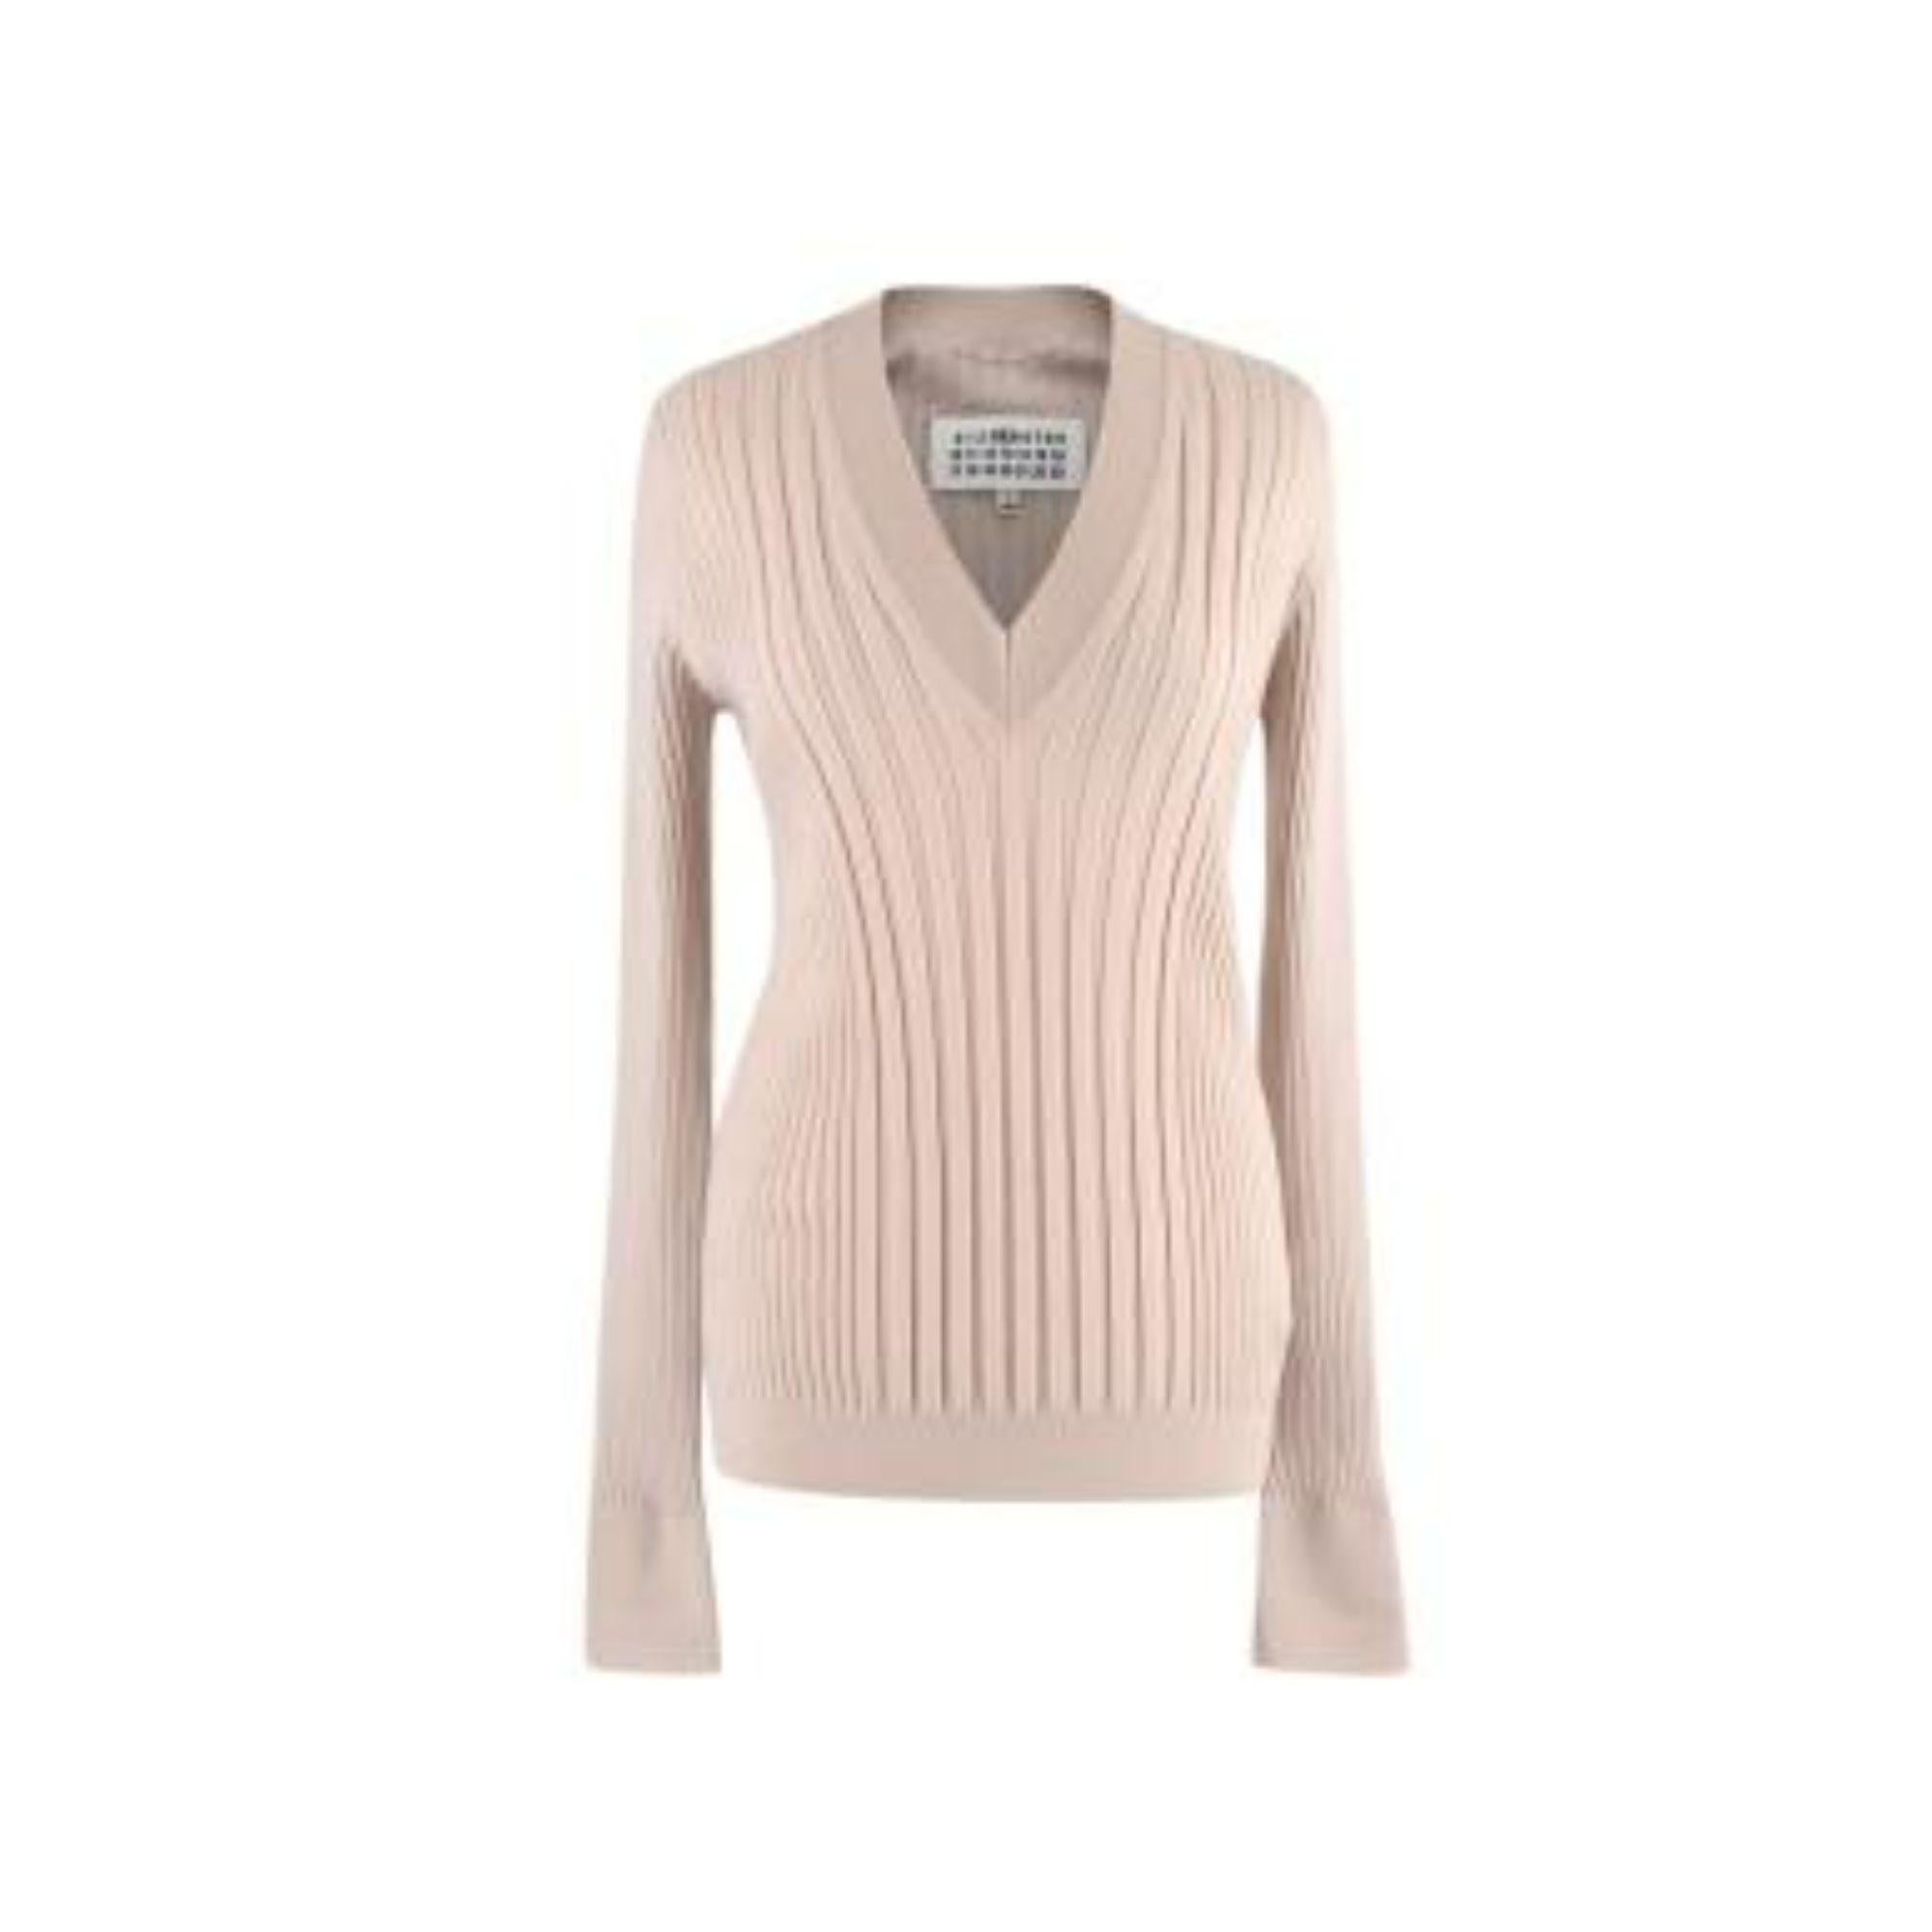 Maison Martin Margiela Cream Wide Ribbed Knit Top

- Long sleeved
- V - neckline
- Ribbed throughout
- Thin construction
- Stretch in material

Material
100% Lana Wool

9.5/10 Excellent condition

PLEASE NOTE, THESE ITEMS ARE PRE-OWNED AND MAY SHOW